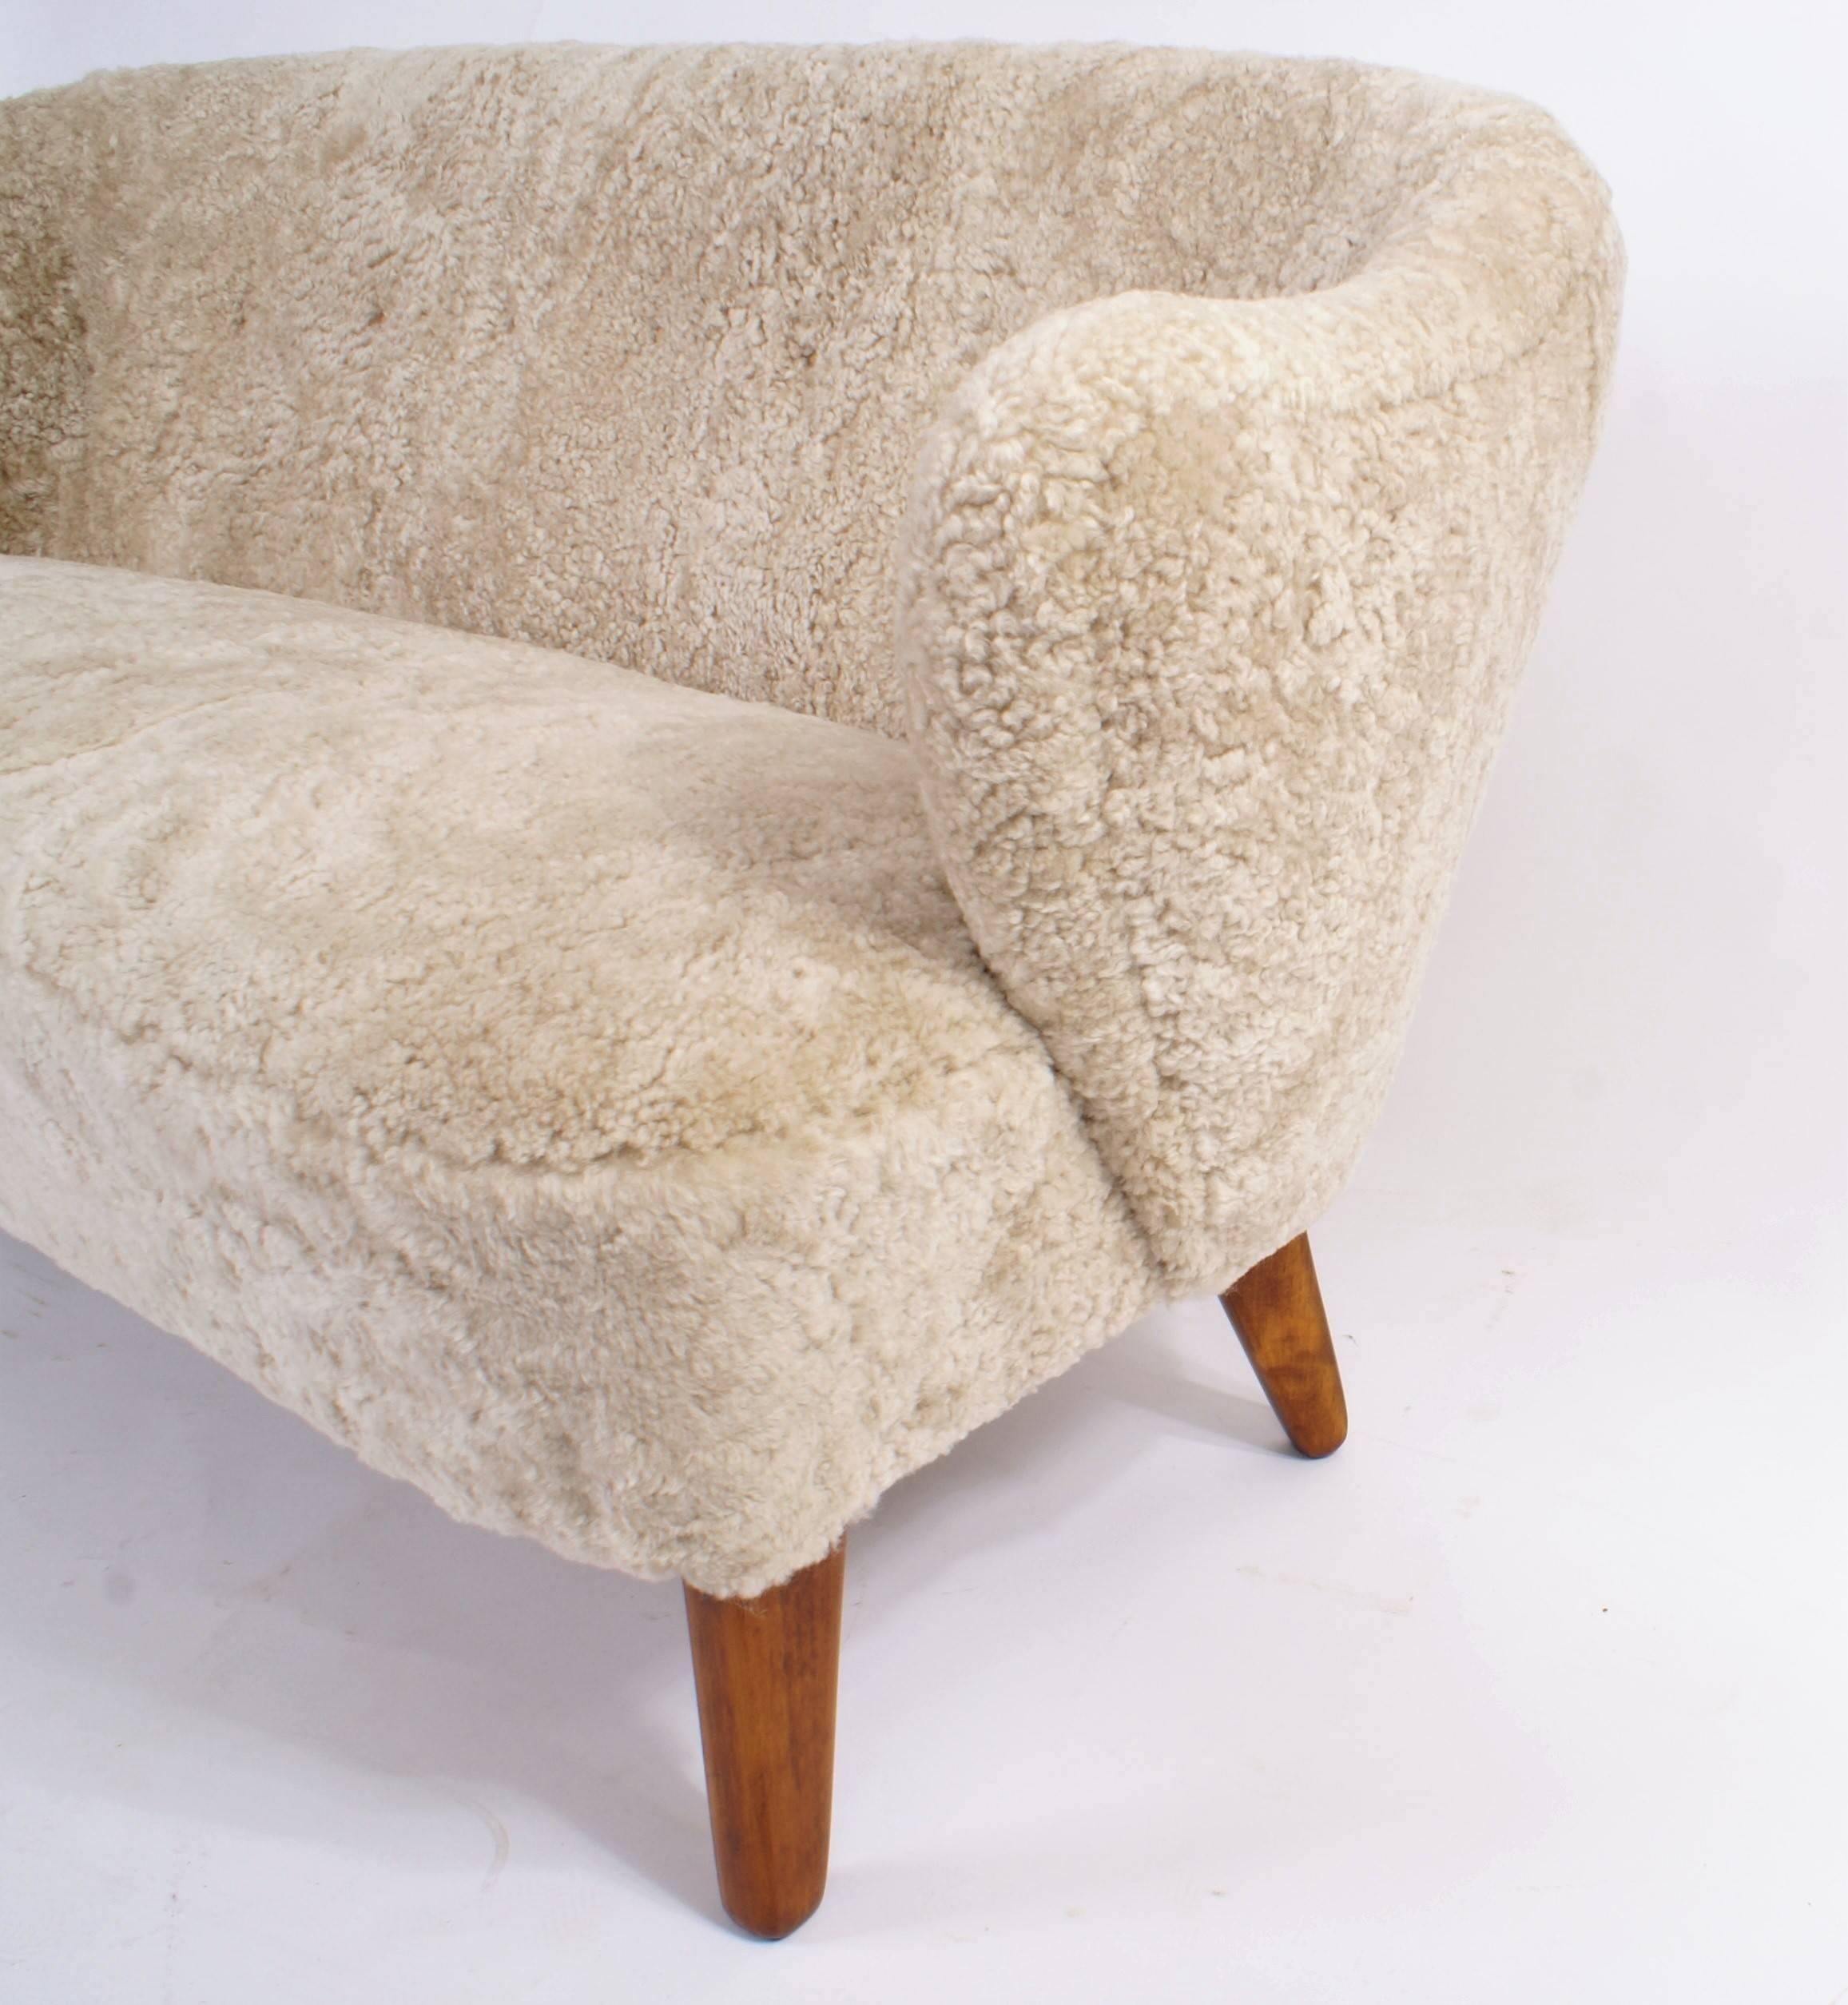 Flemming Lassen, two-seat settee for master cabinetmaker Jacob Kjær, Copenhagen. Beige sheepskin upholstery and ash legs. Designed 1940.

Please view 1stdibs item reference number LU1081215065911 for a pair of Flemming Lassen easy chairs that match